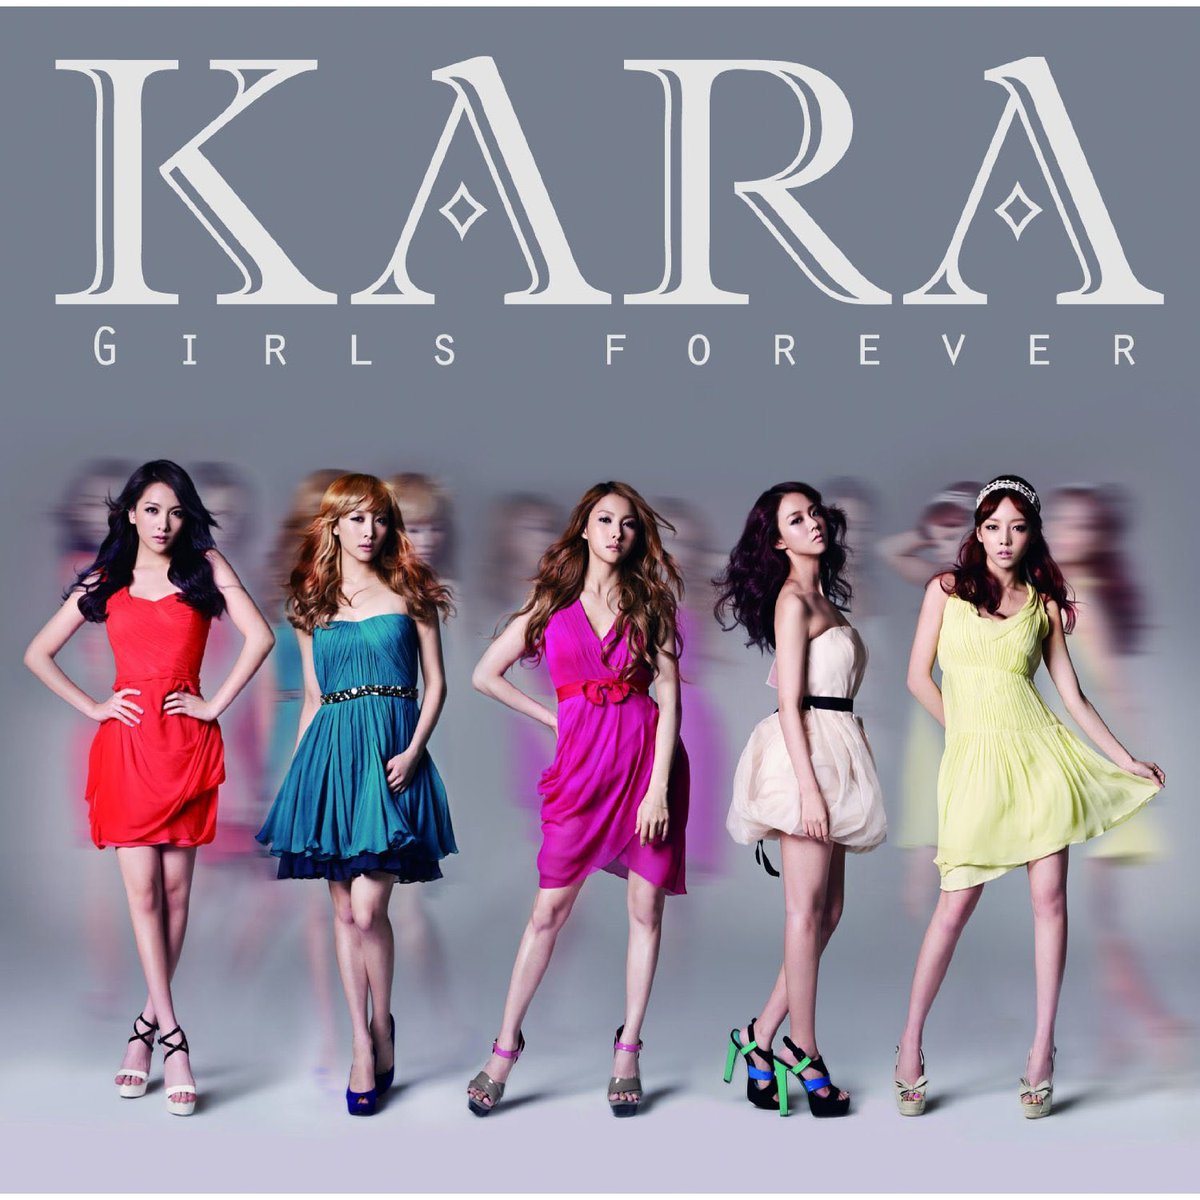 On Nov 14th, KARA released their 3rd Japanese album Girls Forever with singles Speed Up/Girls Power & Electric Boy. It debuted on Oricon's Weekly Album Chart at number two with first week sales of 73,224 copies.